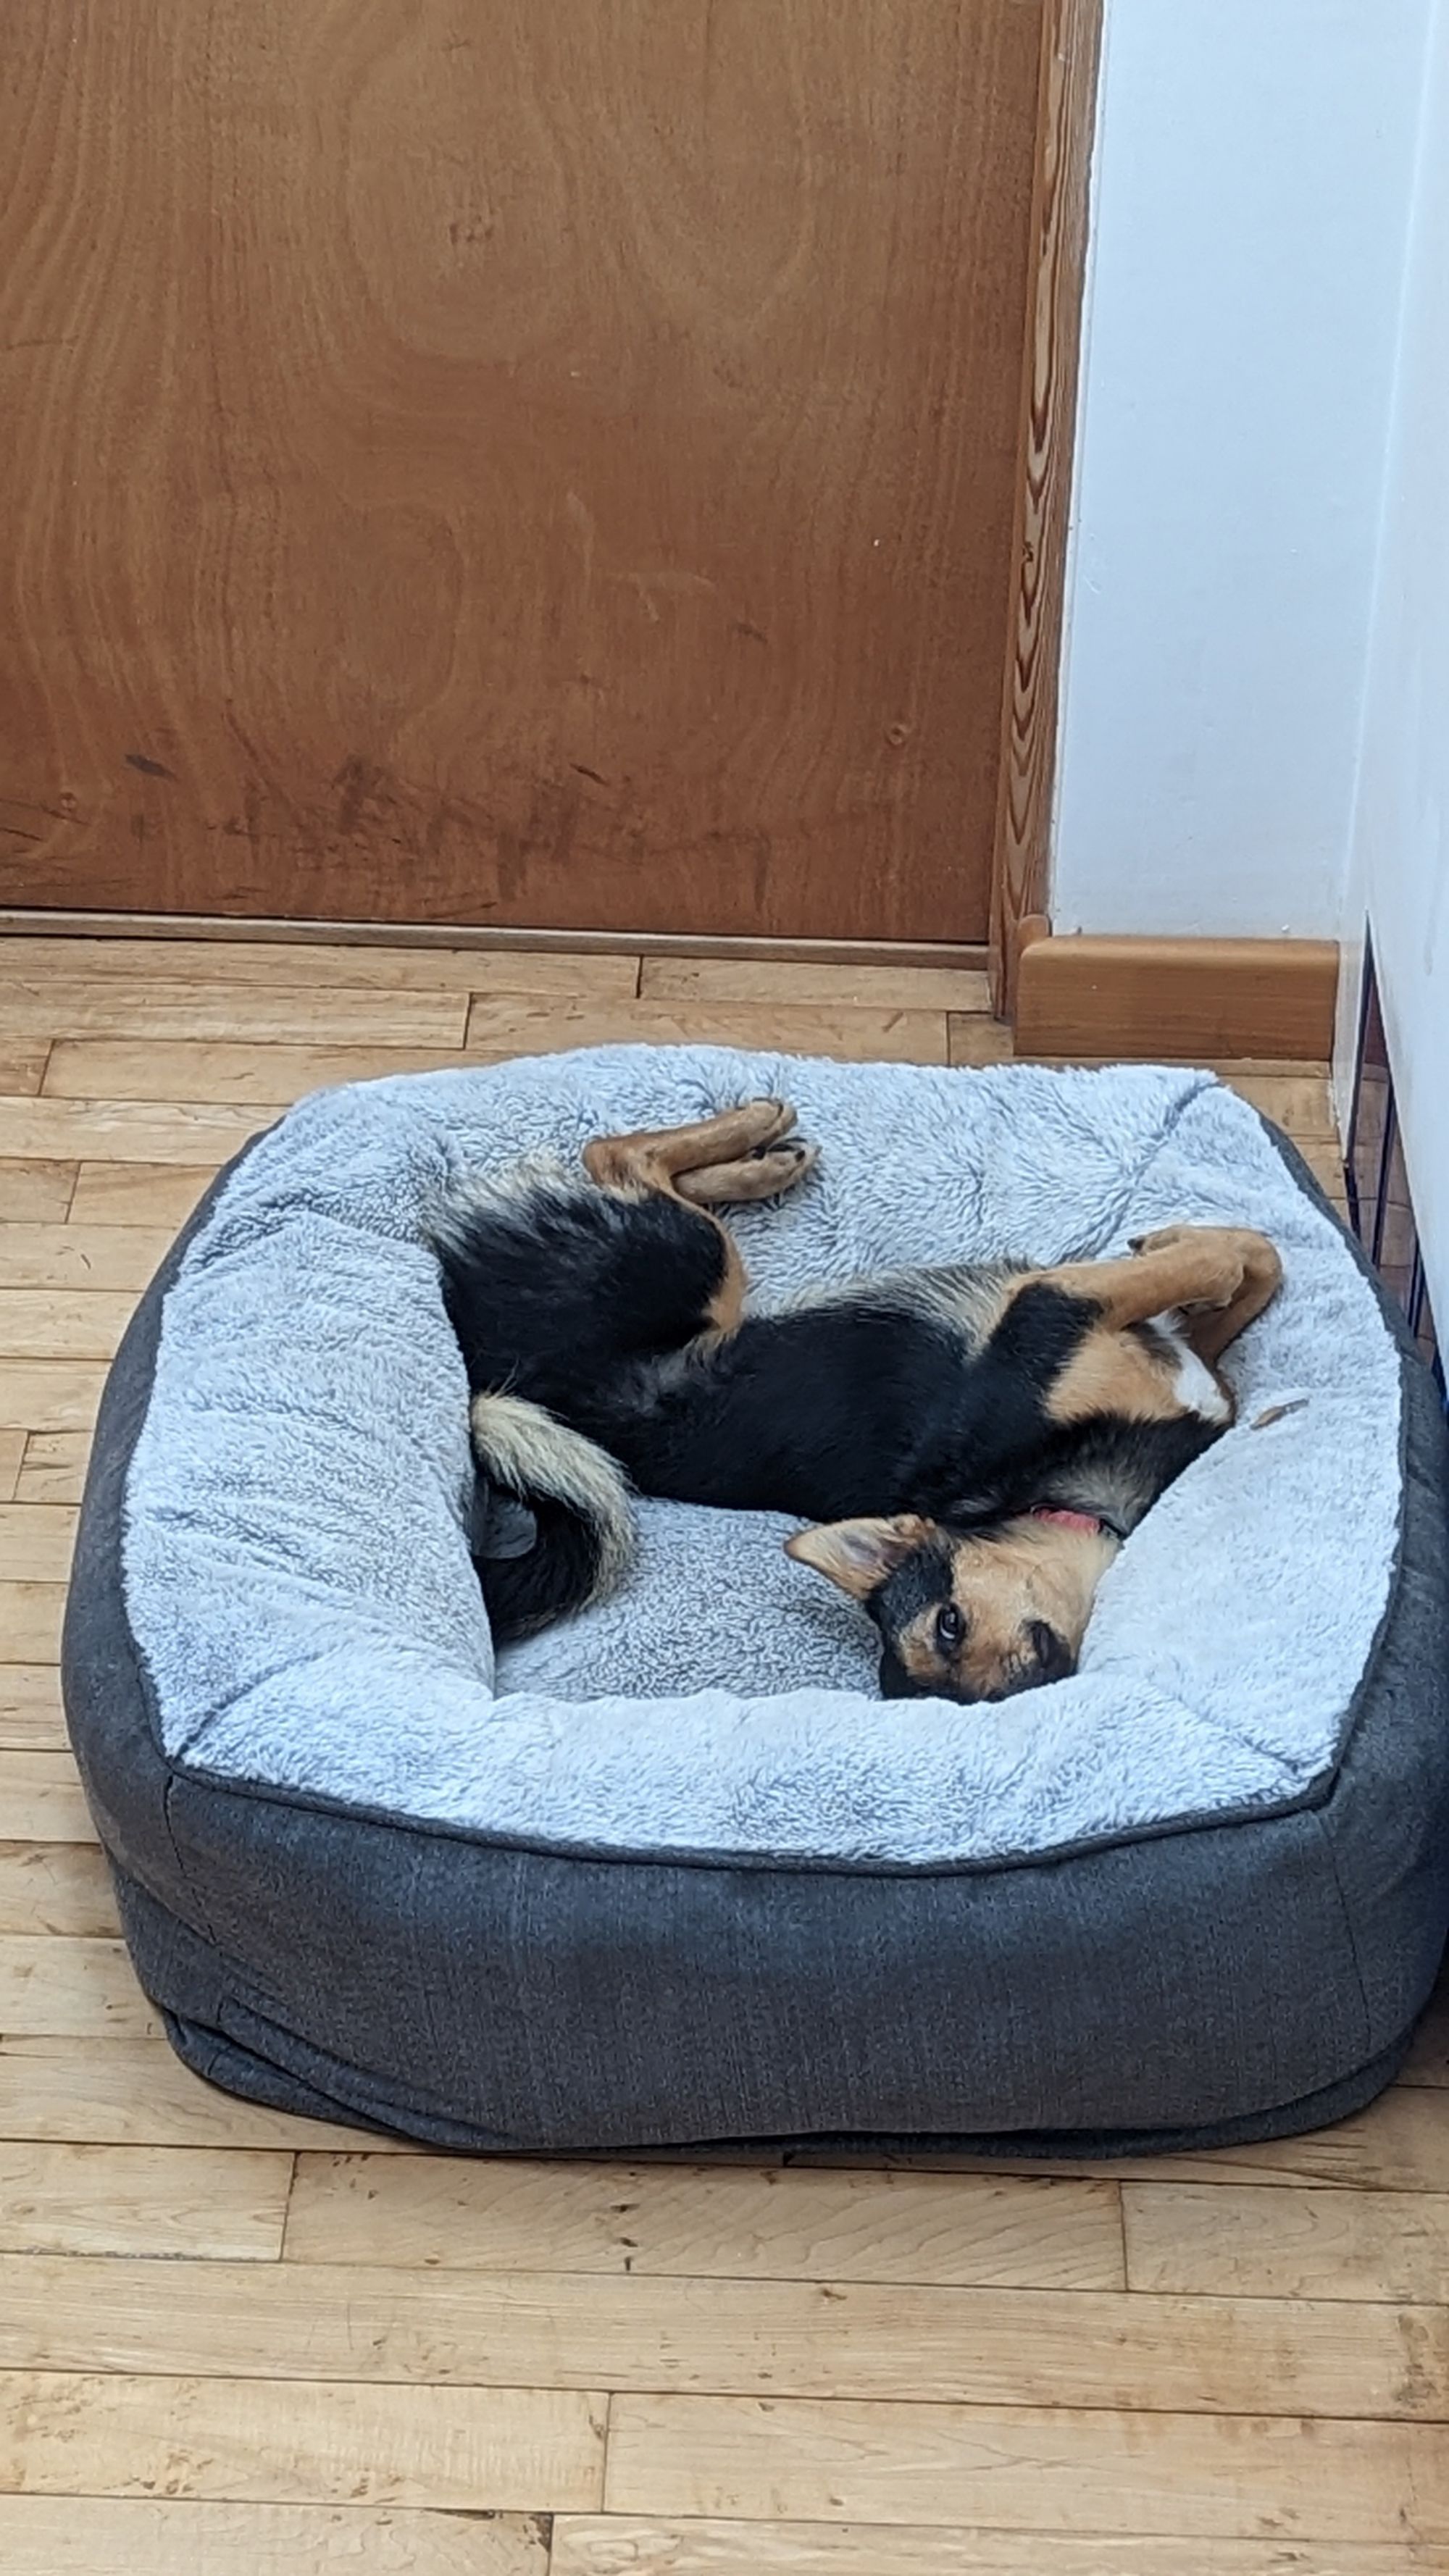 Cookie the puppy in the middle of her comfy bed, instead of lying morally, coiled around the outside of it, with her belly pressing up against the side facing outwards, and her head facing the camera